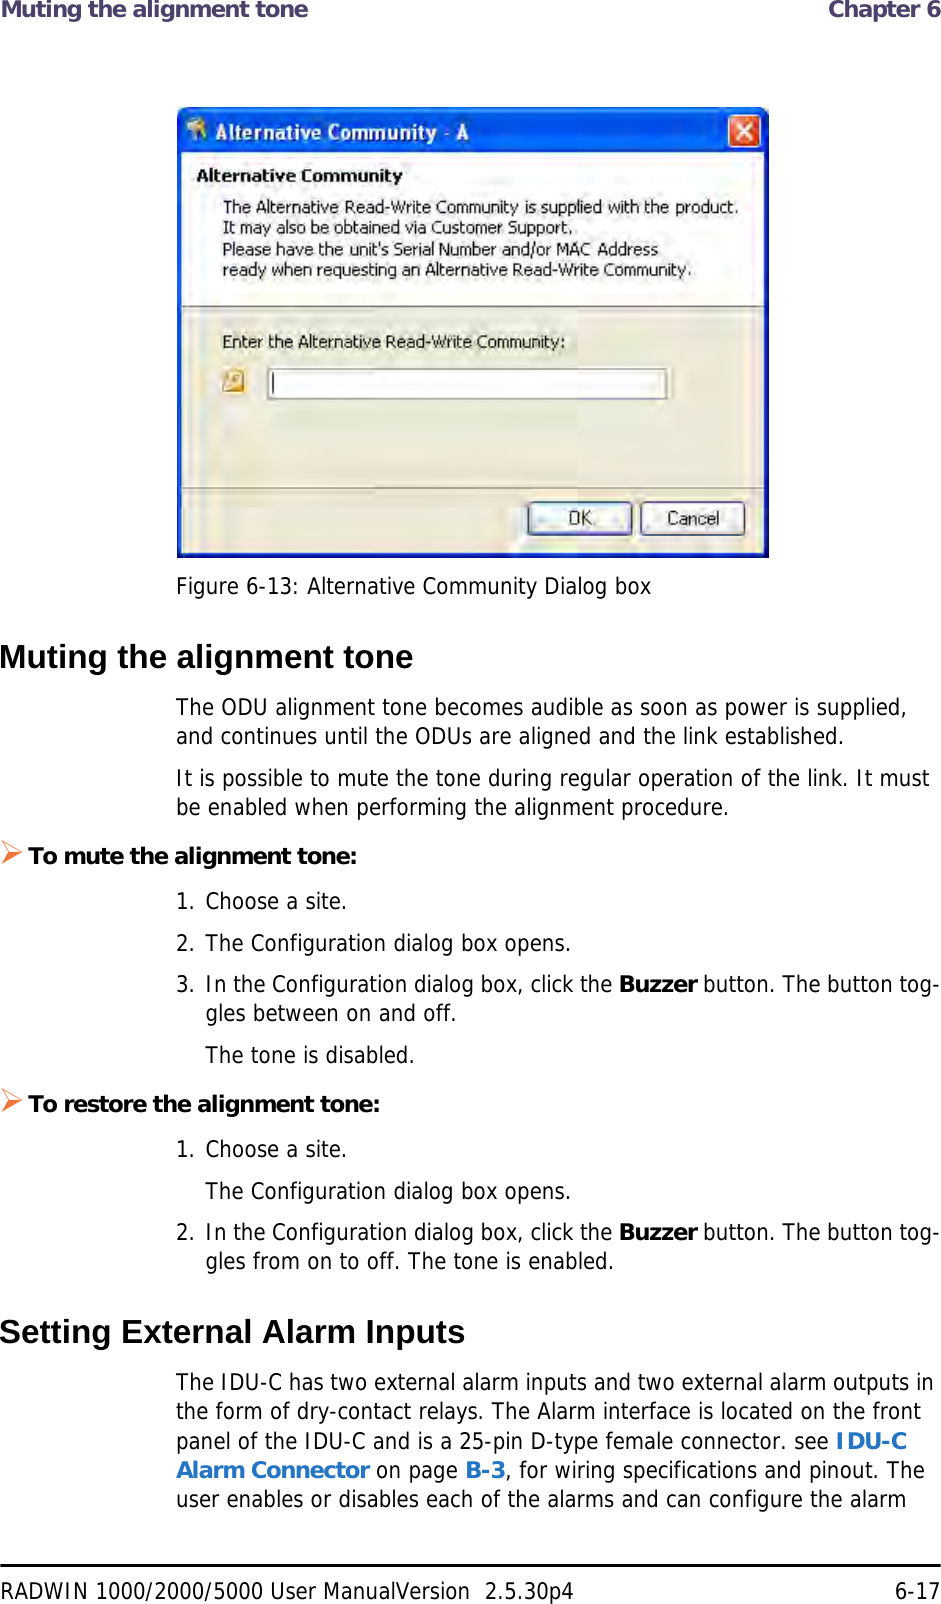 Muting the alignment tone  Chapter 6RADWIN 1000/2000/5000 User ManualVersion  2.5.30p4 6-17Figure 6-13: Alternative Community Dialog boxMuting the alignment toneThe ODU alignment tone becomes audible as soon as power is supplied, and continues until the ODUs are aligned and the link established.It is possible to mute the tone during regular operation of the link. It must be enabled when performing the alignment procedure.To mute the alignment tone:1. Choose a site.2. The Configuration dialog box opens.3. In the Configuration dialog box, click the Buzzer button. The button tog-gles between on and off.The tone is disabled.To restore the alignment tone:1. Choose a site.The Configuration dialog box opens.2. In the Configuration dialog box, click the Buzzer button. The button tog-gles from on to off. The tone is enabled.Setting External Alarm InputsThe IDU-C has two external alarm inputs and two external alarm outputs in the form of dry-contact relays. The Alarm interface is located on the front panel of the IDU-C and is a 25-pin D-type female connector. see IDU-C Alarm Connector on page B-3, for wiring specifications and pinout. The user enables or disables each of the alarms and can configure the alarm 